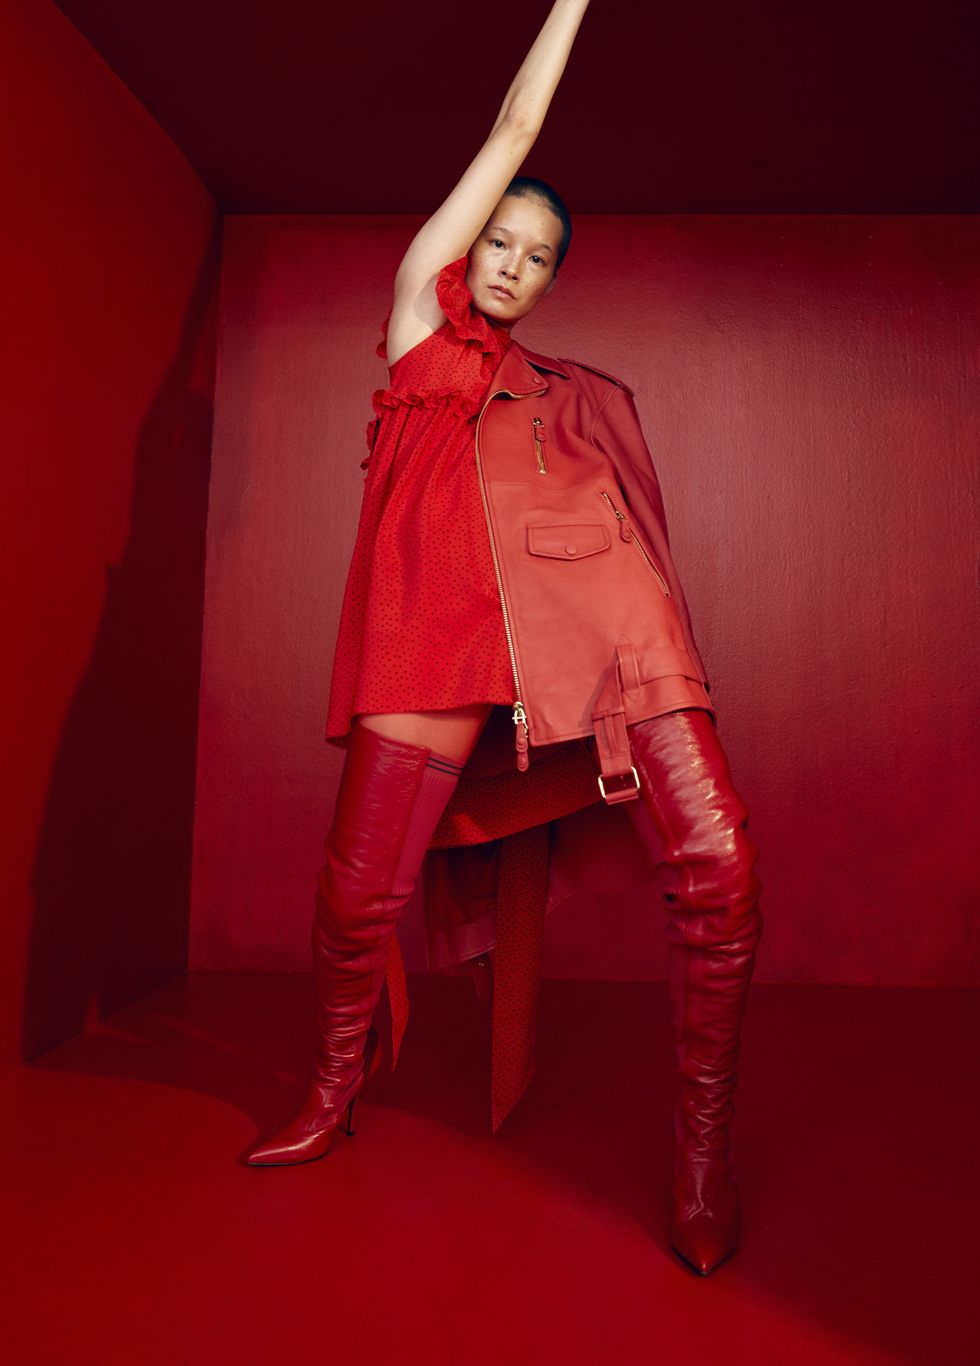 Red, Fashion, Outerwear, Photo shoot, Photography, Performance, Fashion design, Leather, Costume, Thigh, 